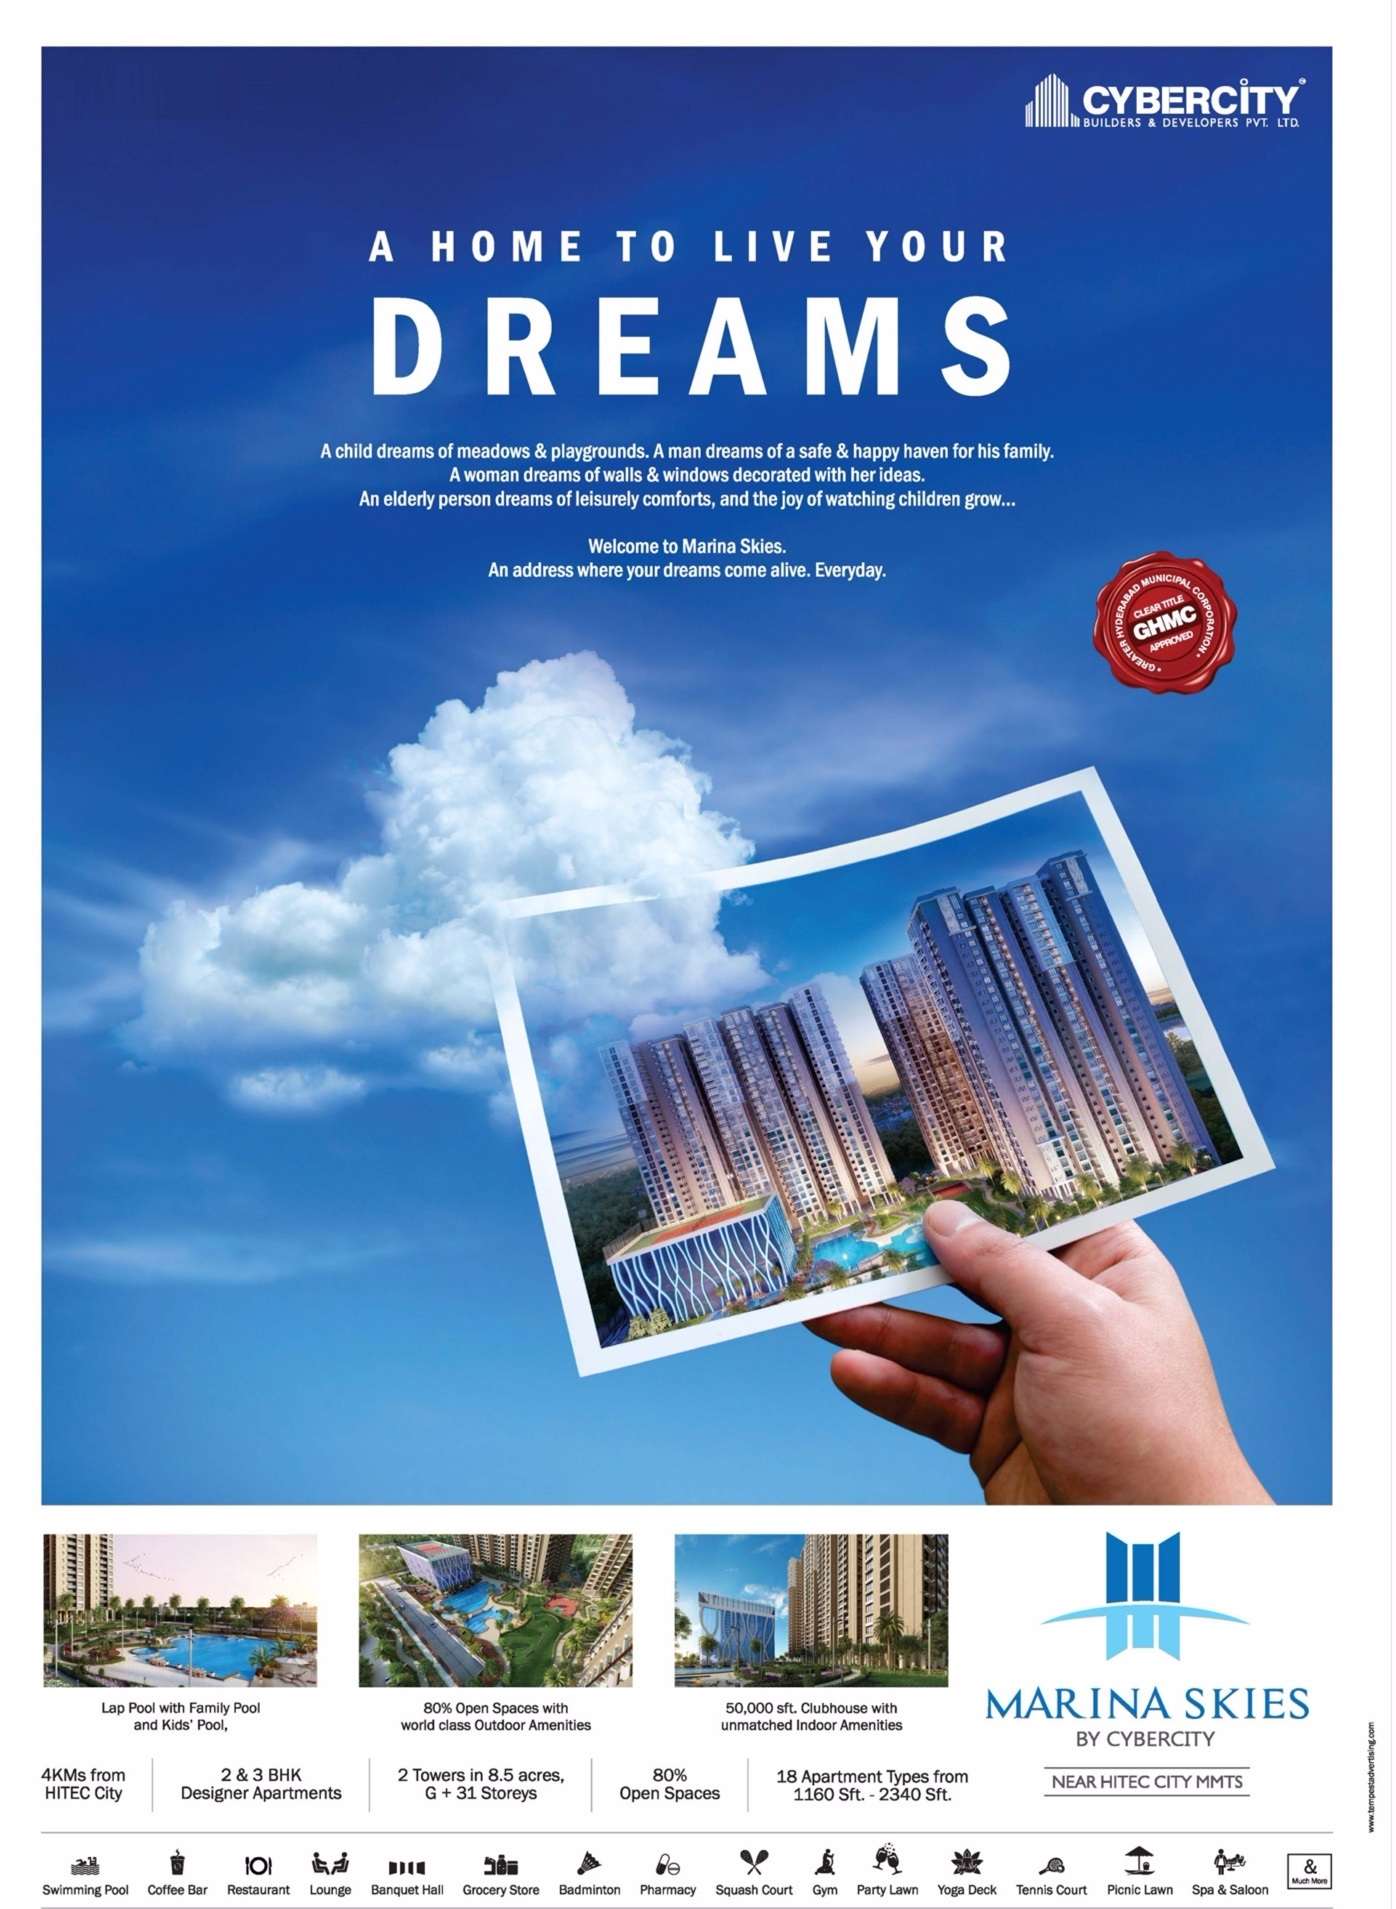 Welcome to an address where your dreams come alive everyday at Cybercity Marina Skies in Hyderabad Update